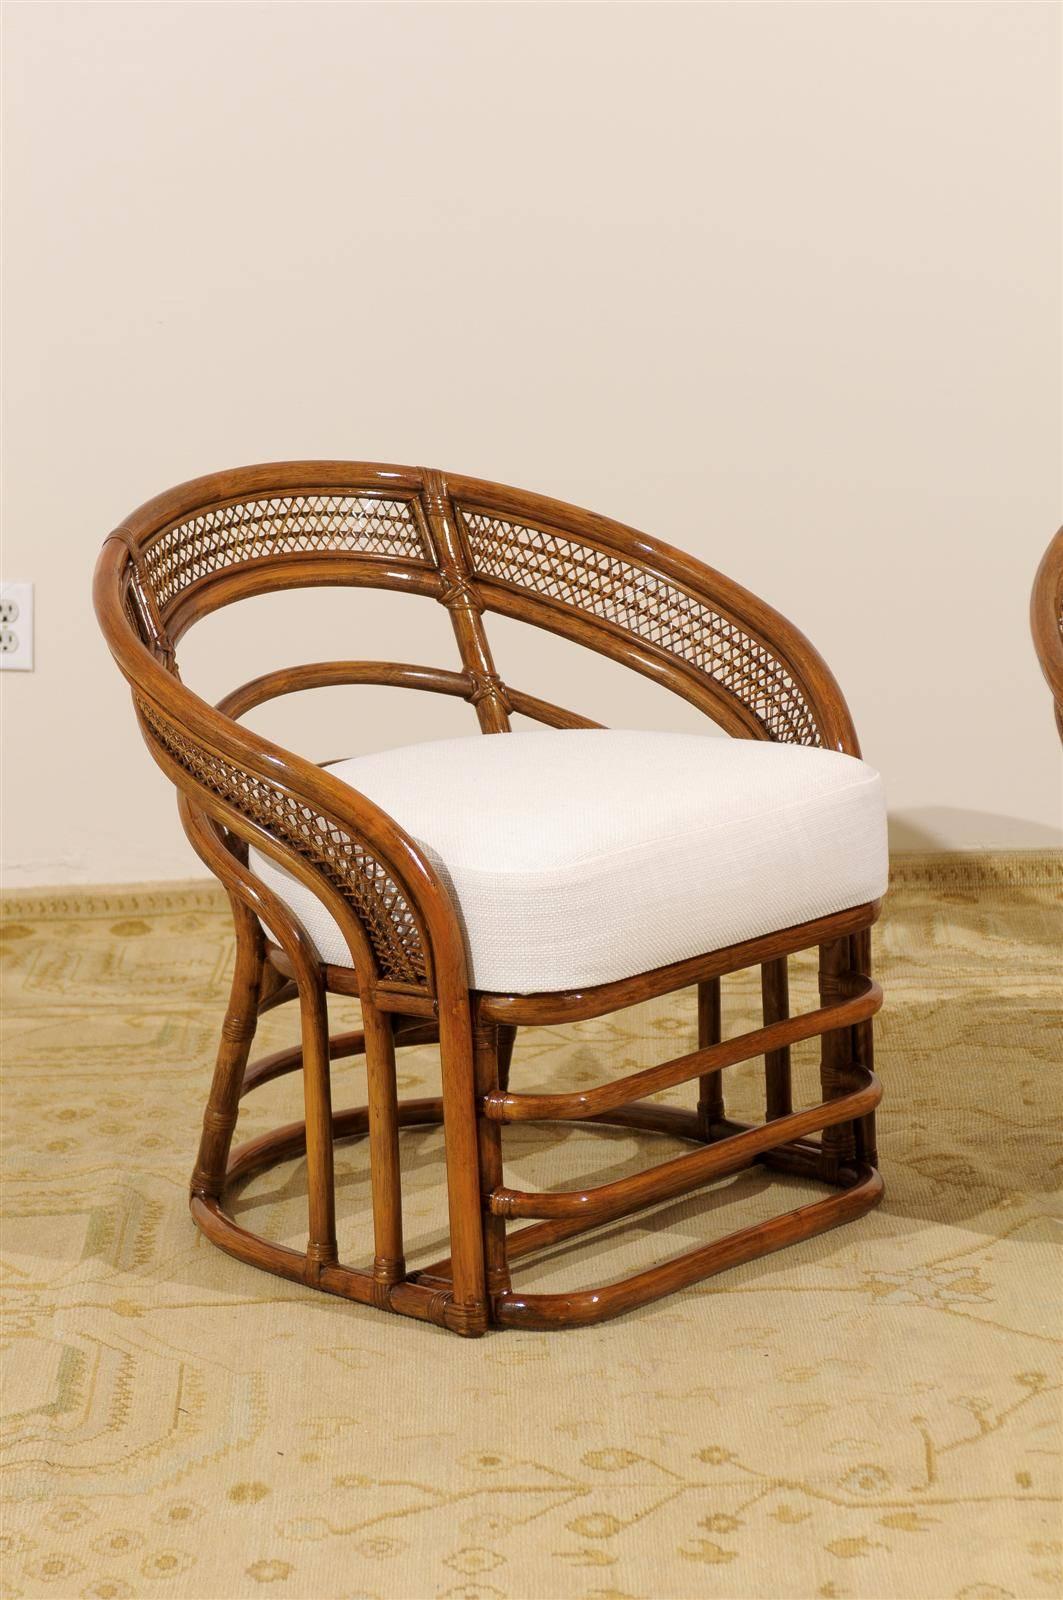 Unknown Fabulous Pair of Restored Rattan Chairs by Brown Jordan